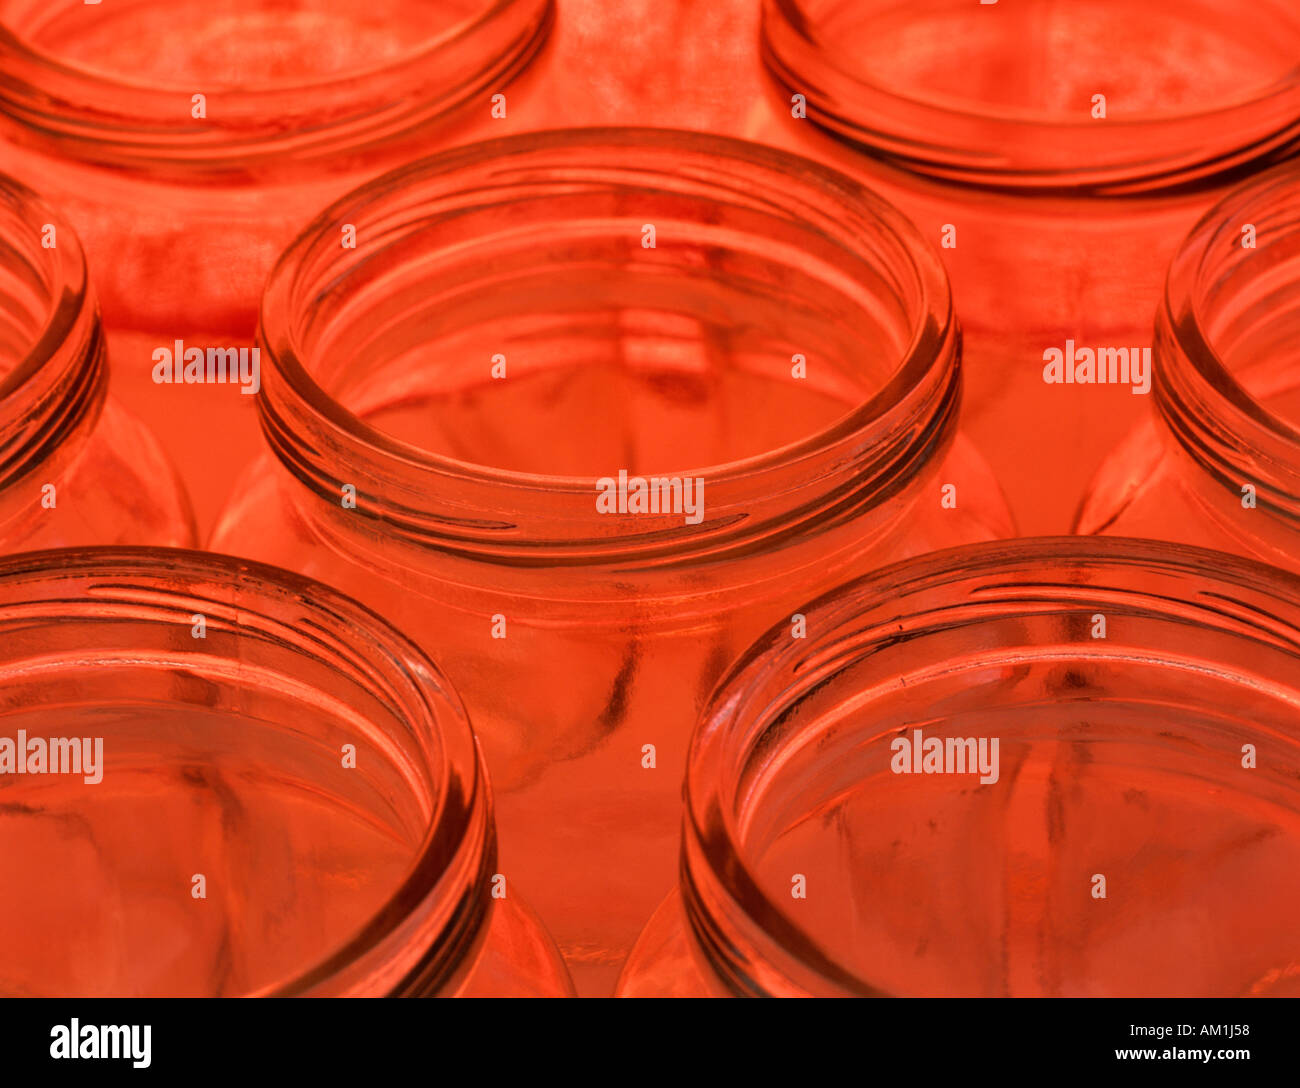 Download Empty Clear Glass Jam Jars With A Hot Orange Background Stock Photo Alamy Yellowimages Mockups